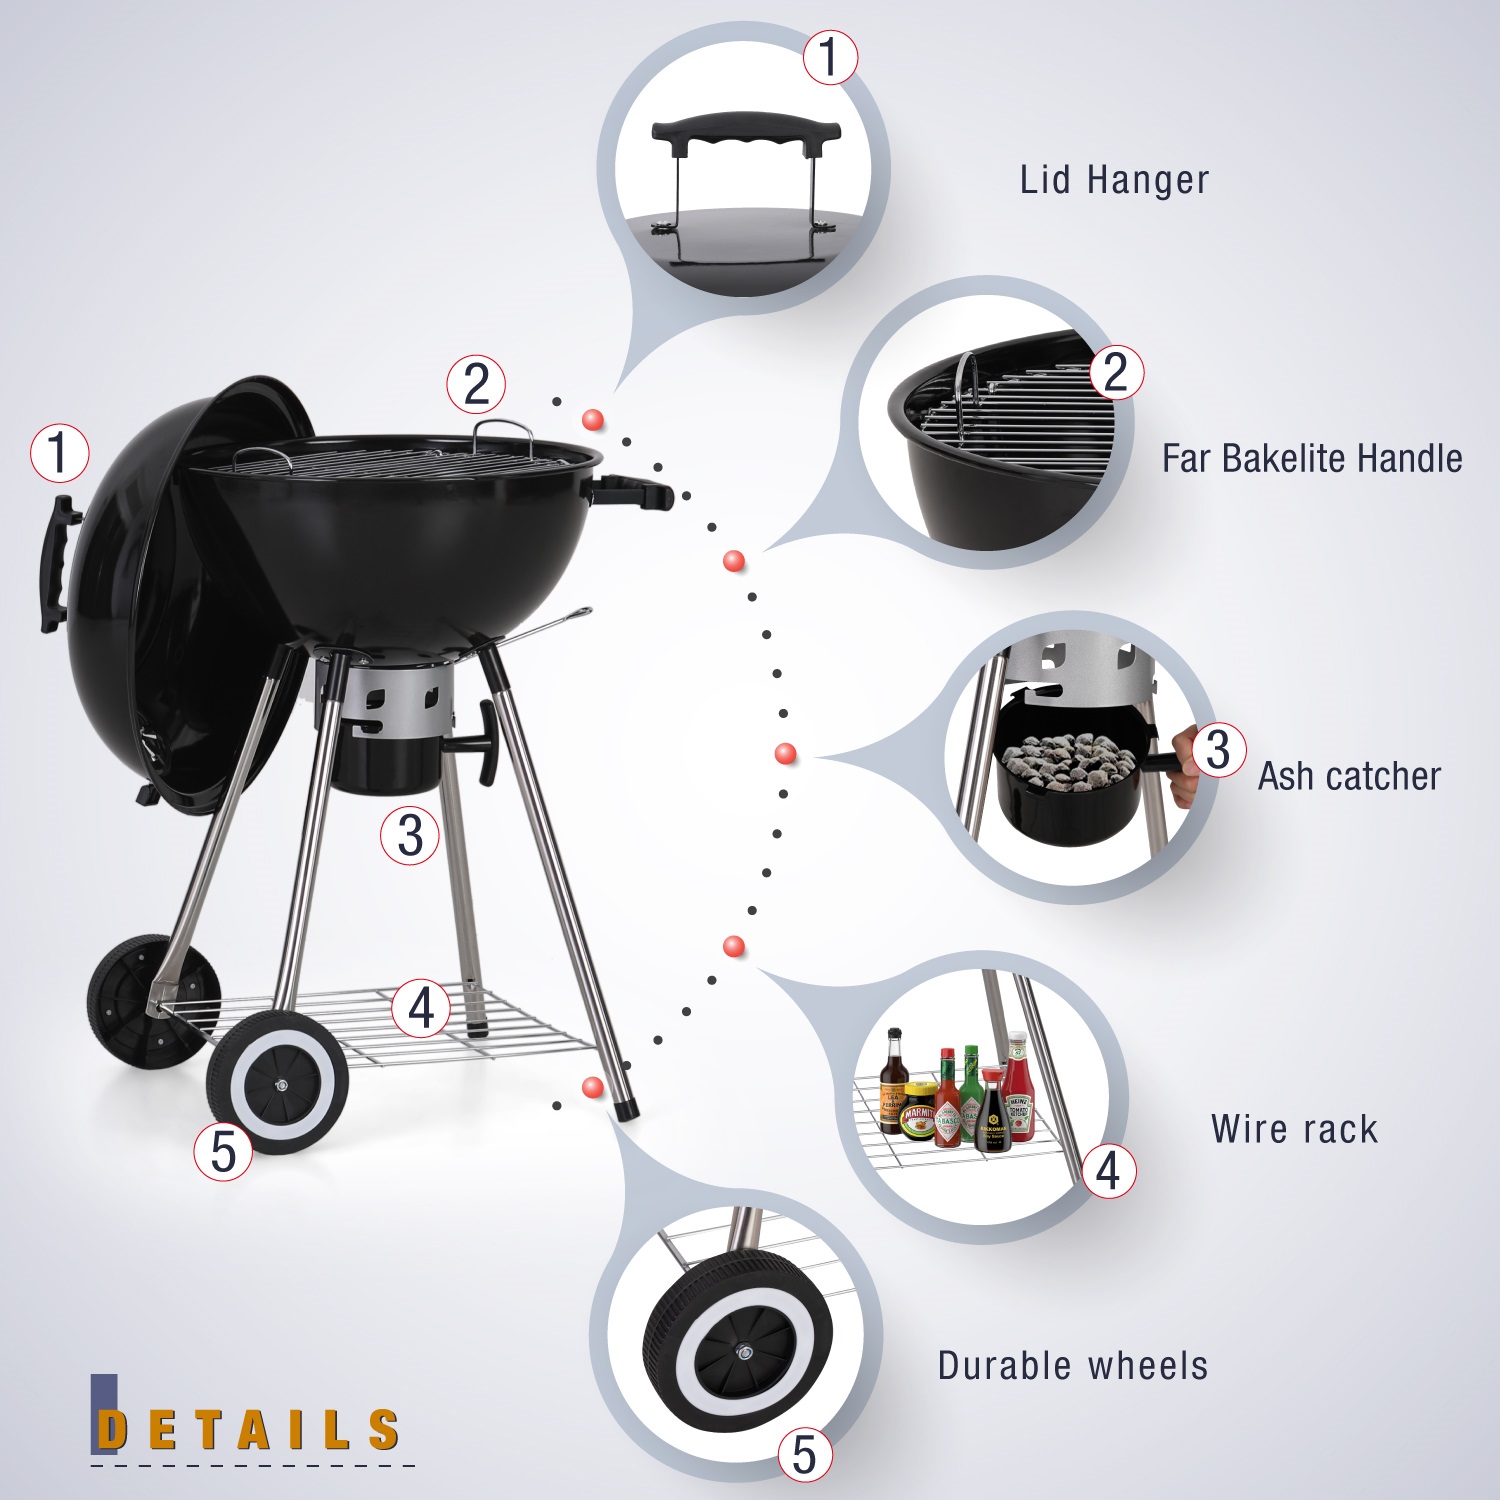 Summit Living 18" Portable Kettle Charcoal BBQ Grill, Black - image 5 of 8